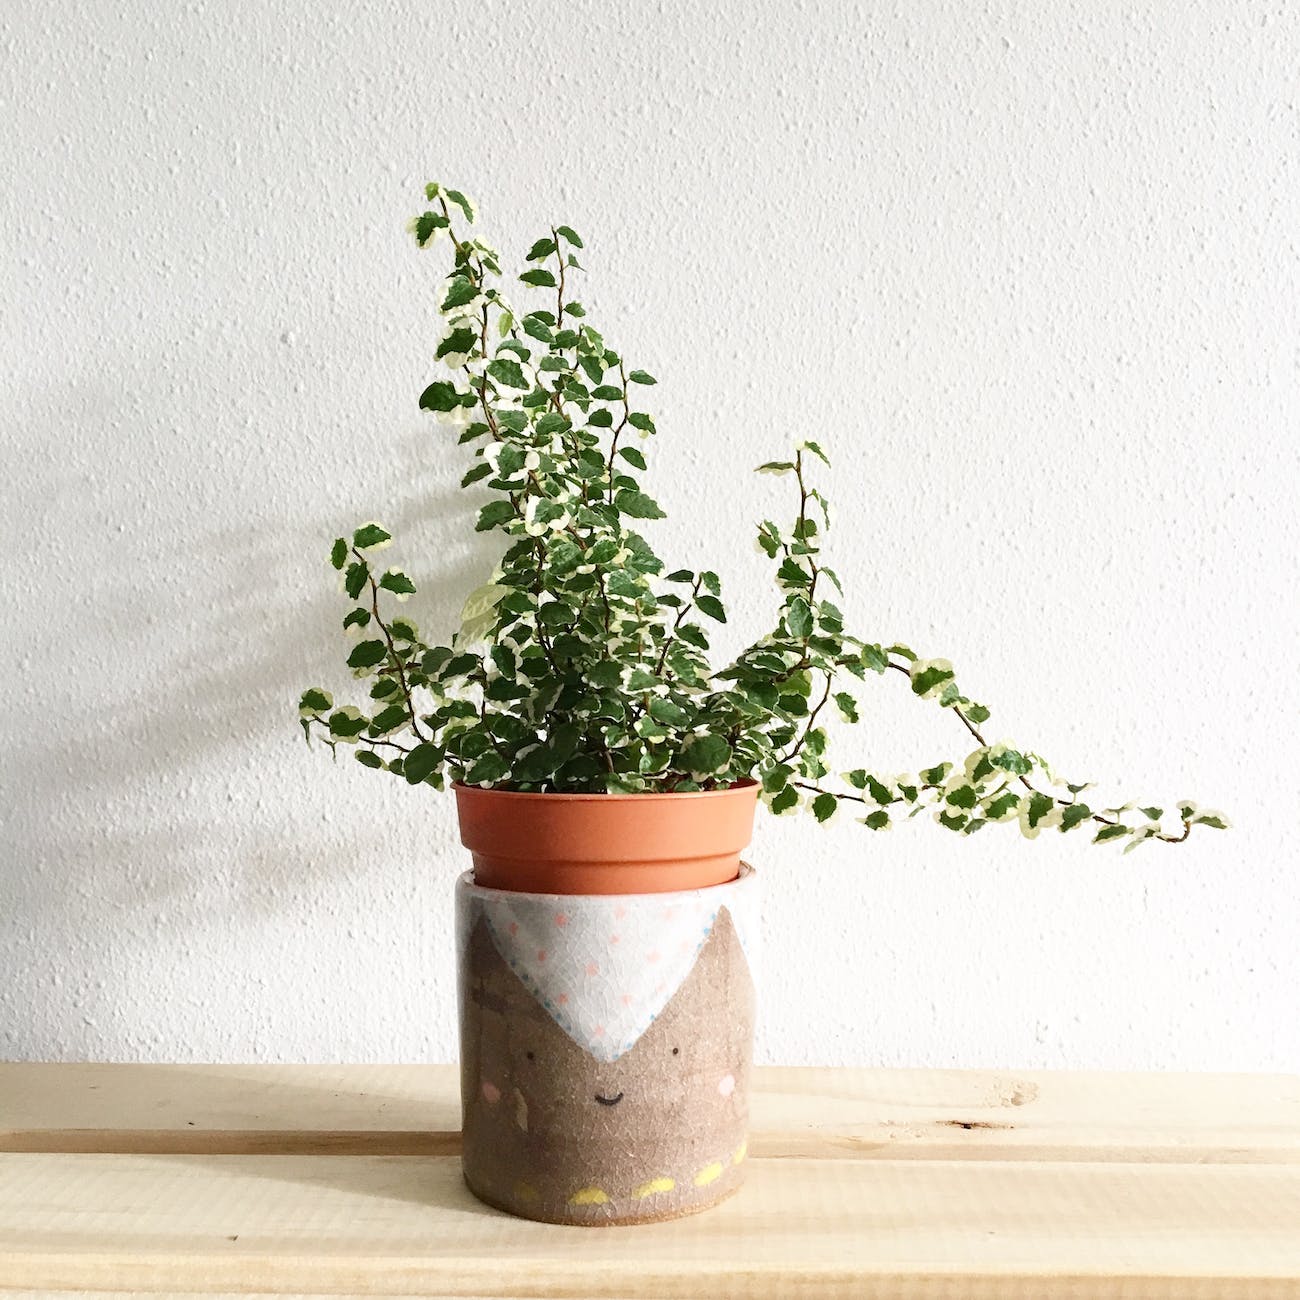 green leafy plant potted in clay pot